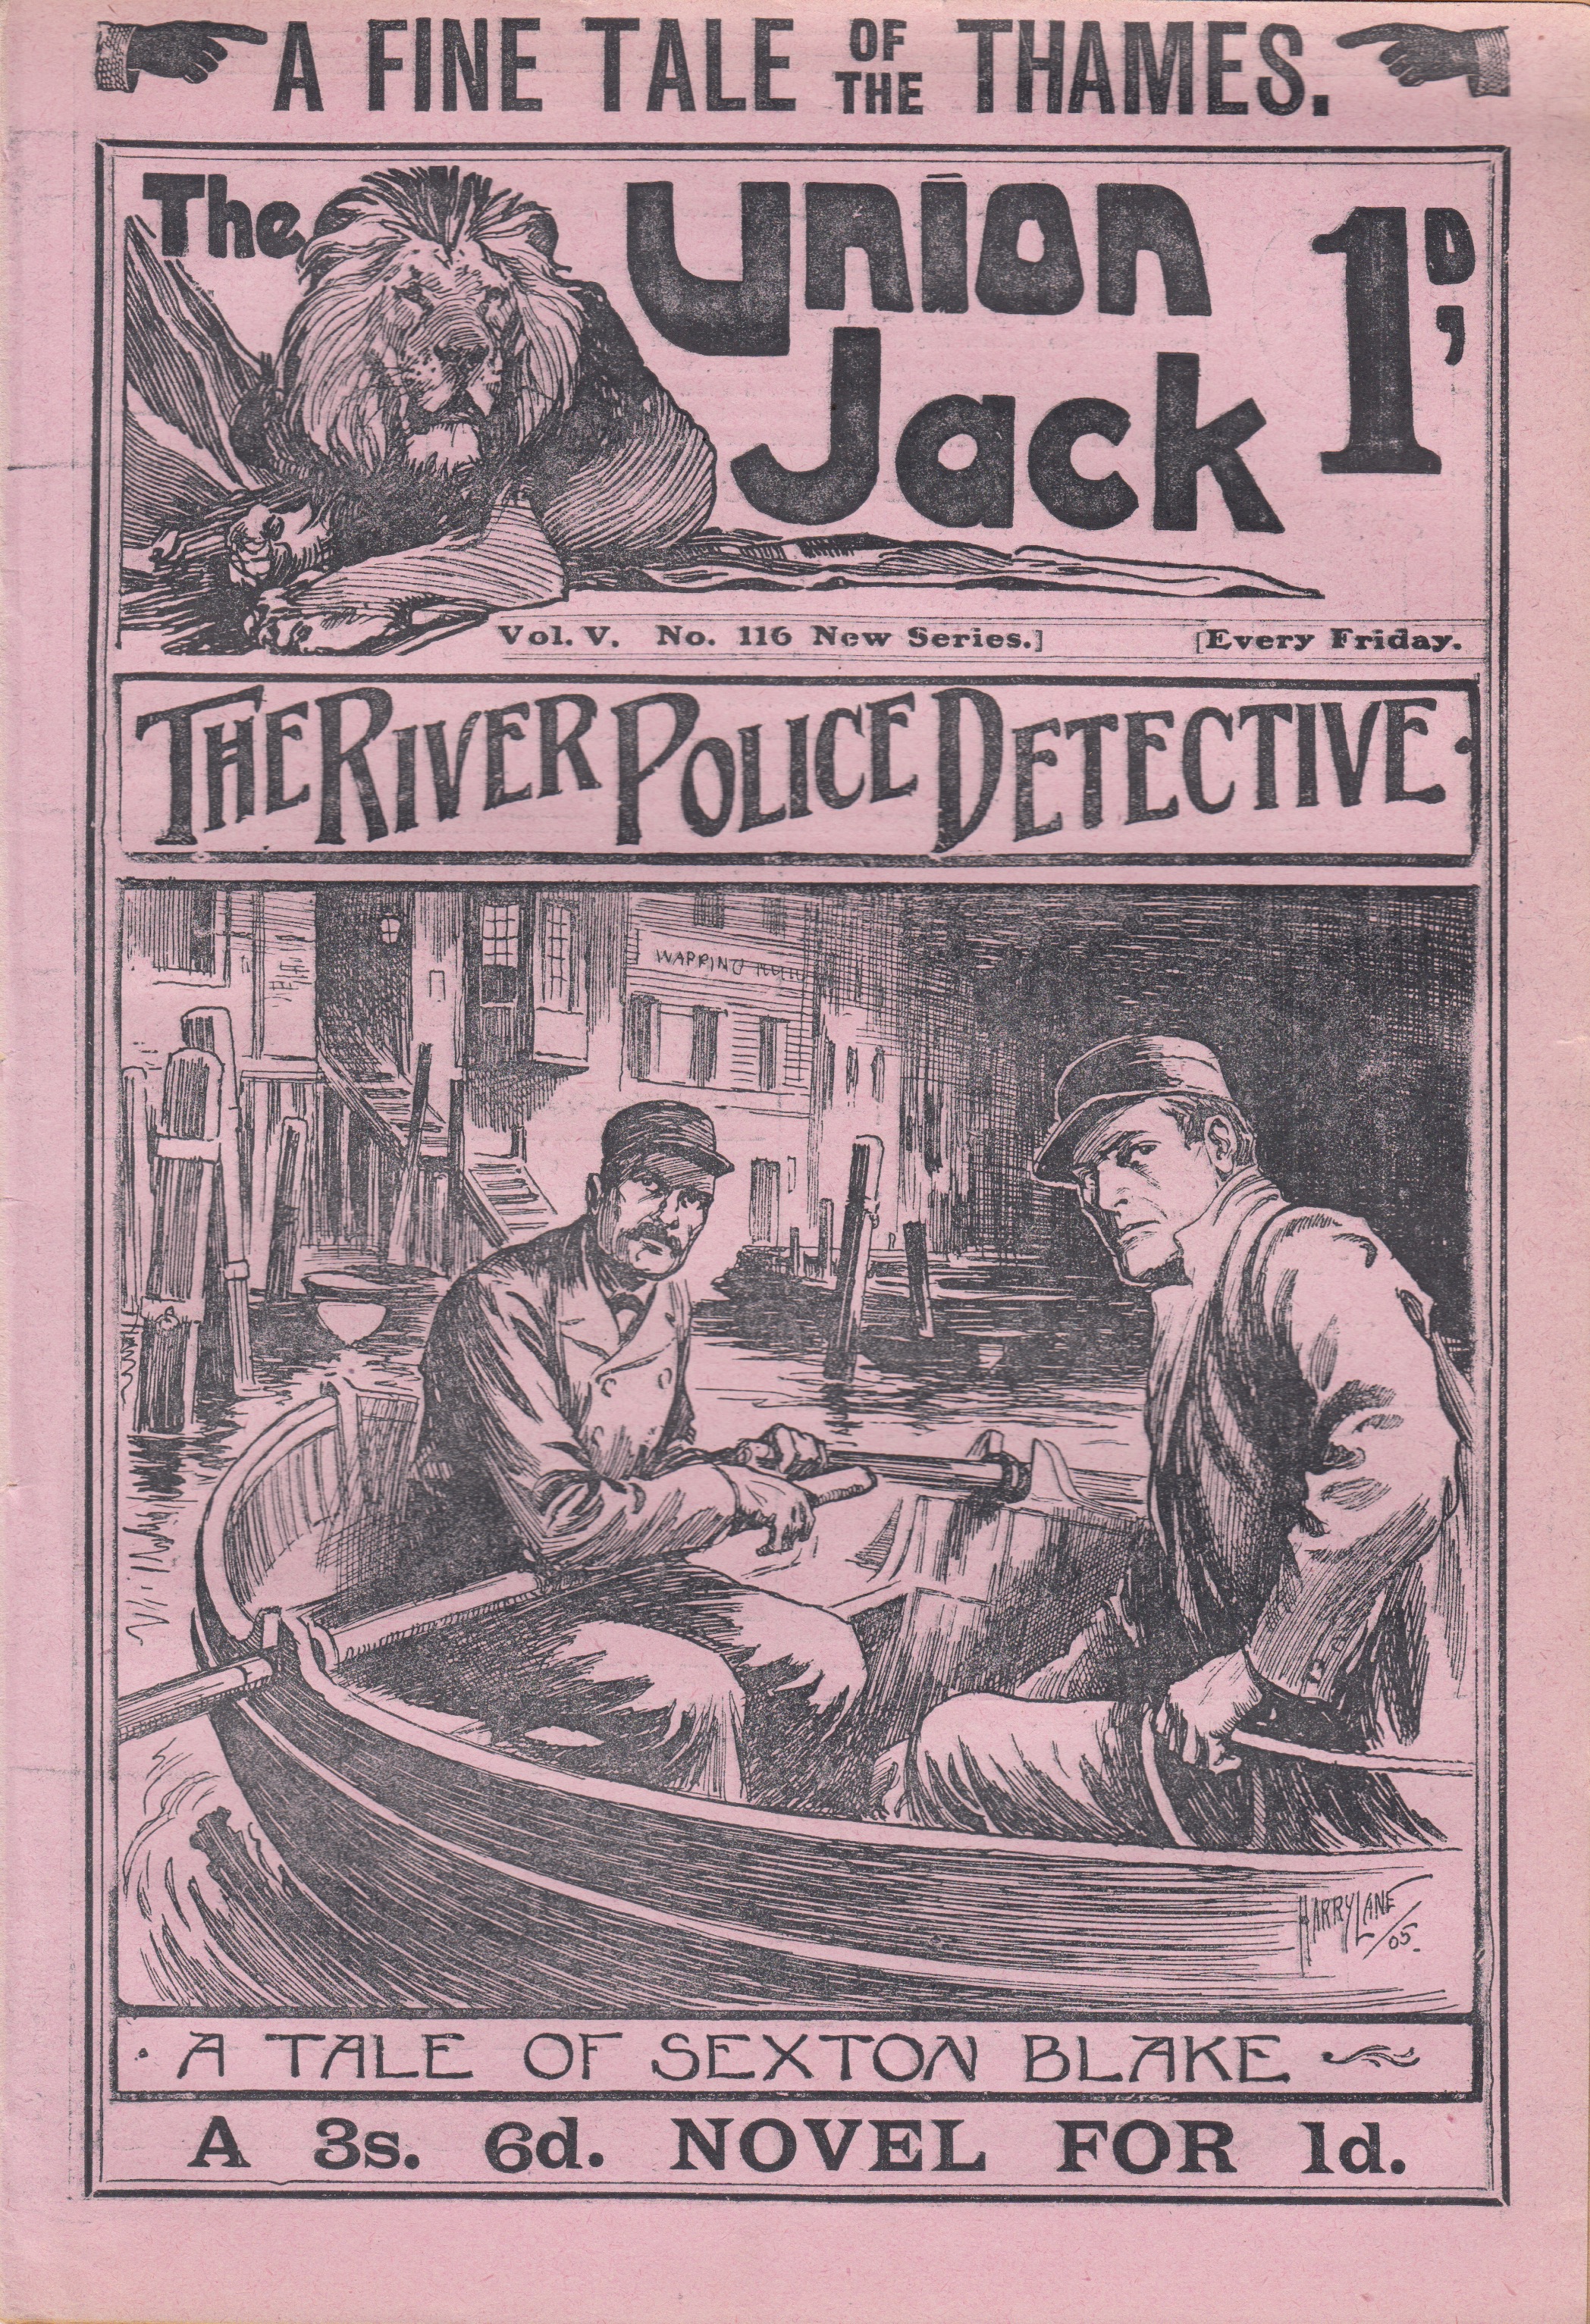 THE RIVER POLICE DETECTIVE